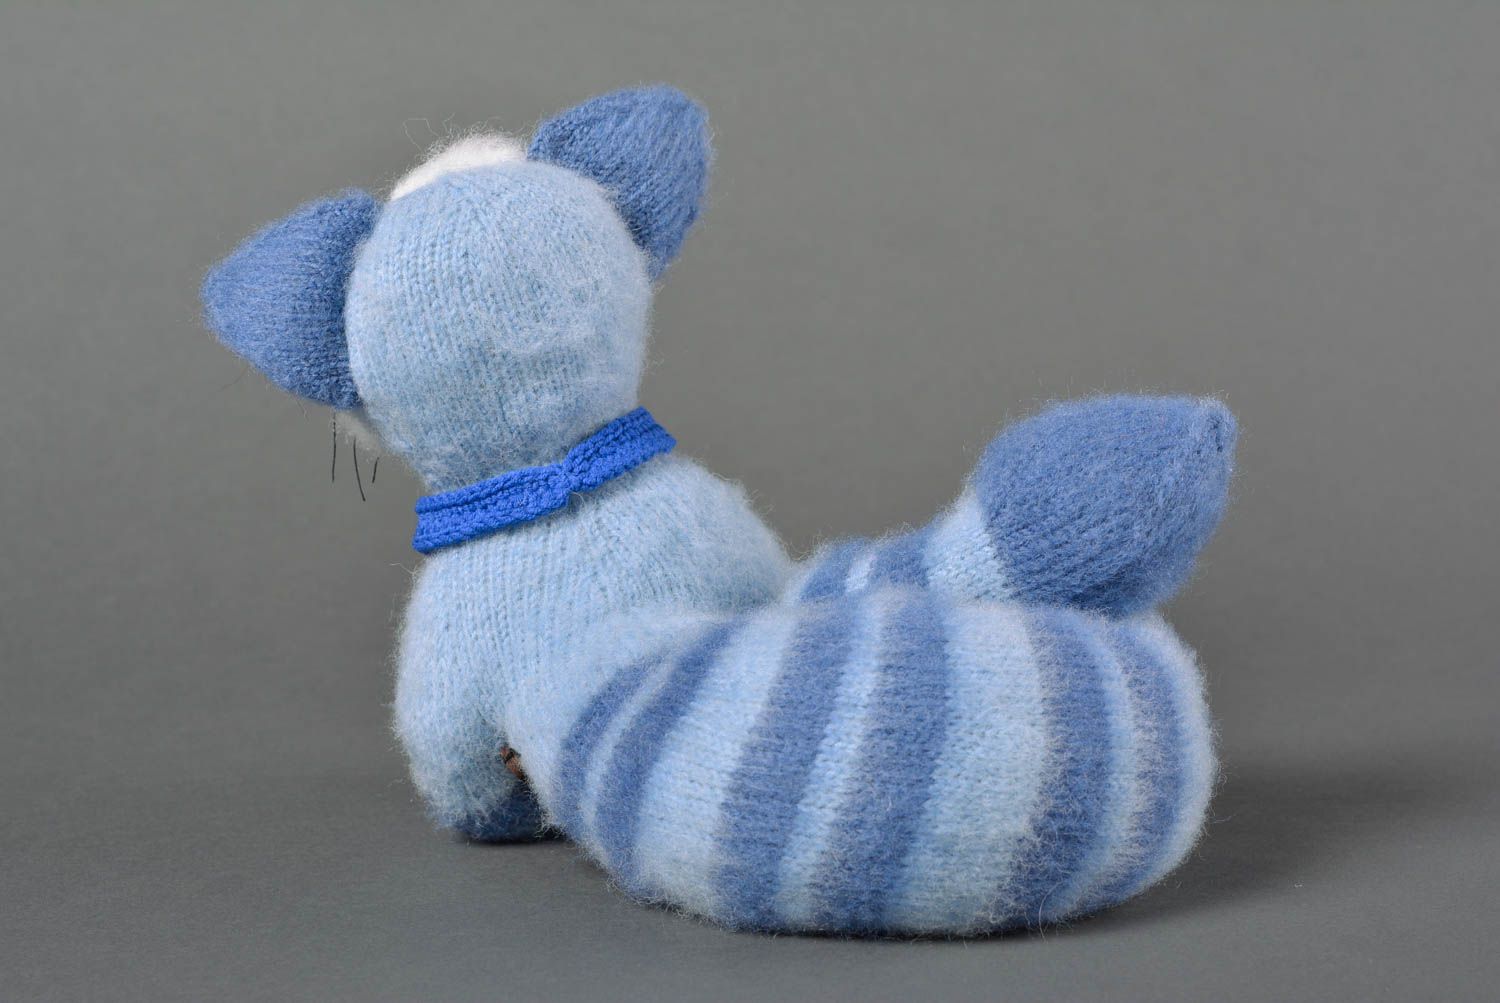 Handmade knitted cat toy stuffed toy nursery decor present for children photo 4